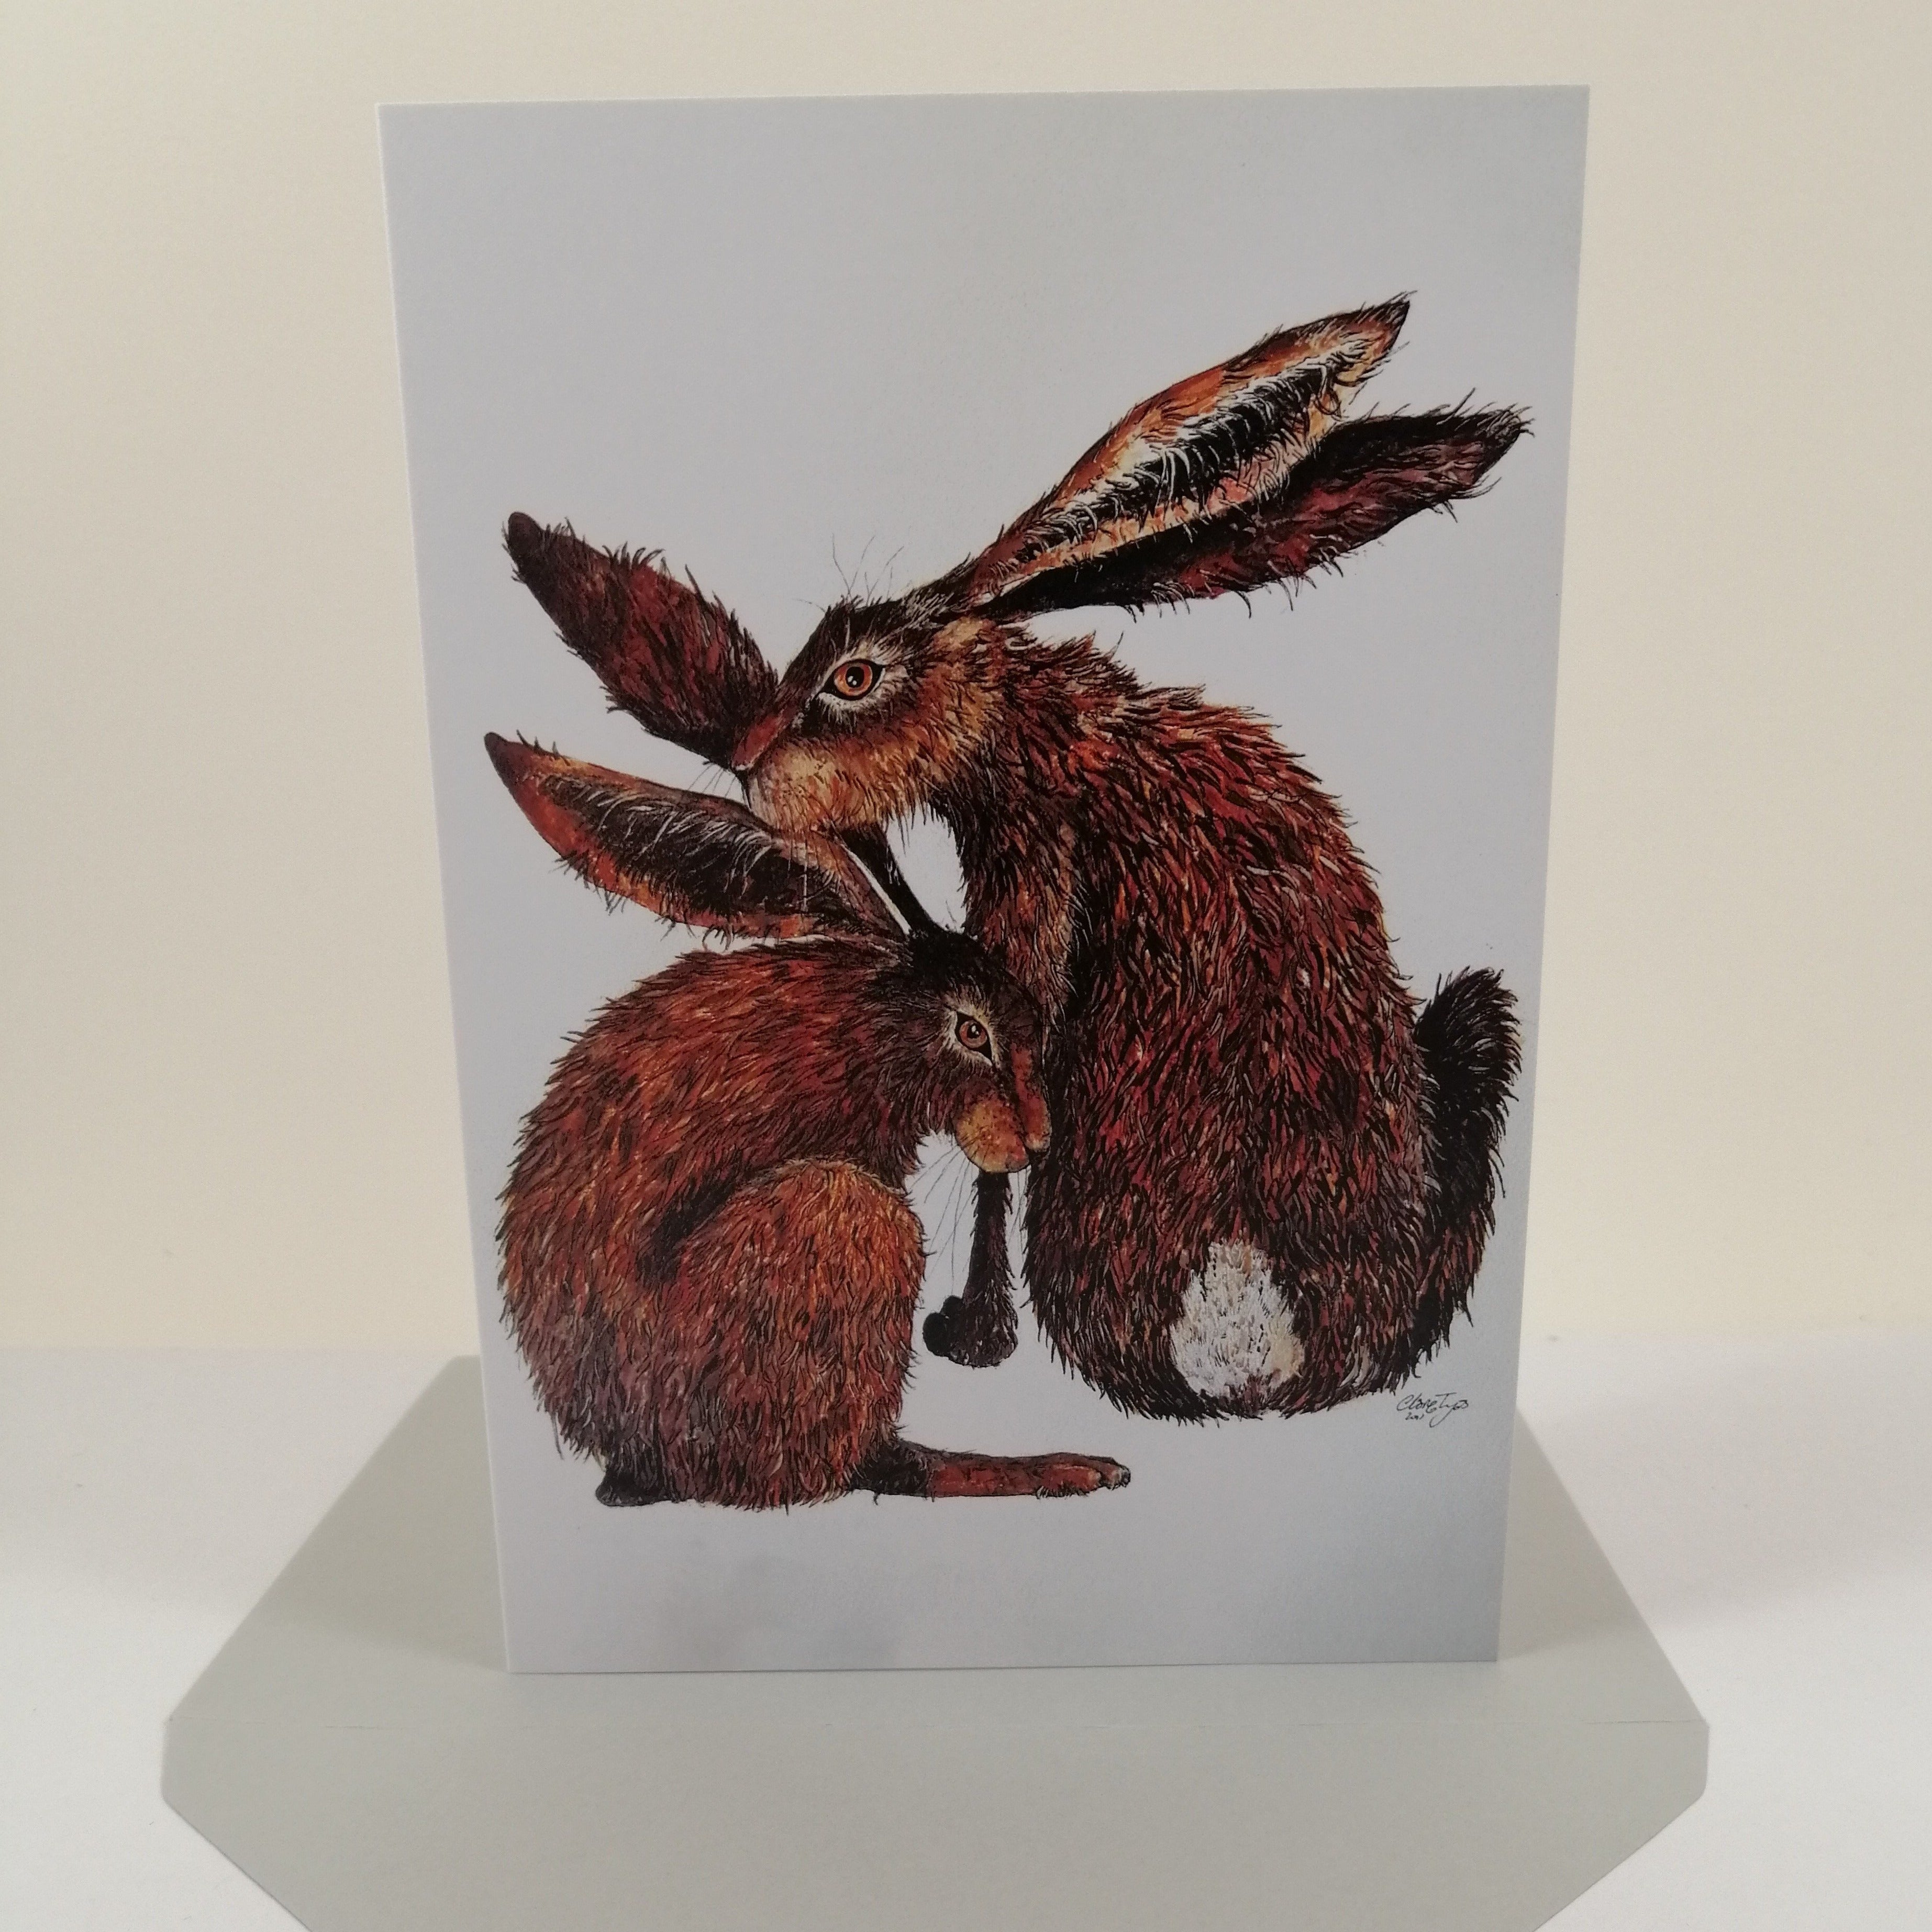 two hares cuddled up together